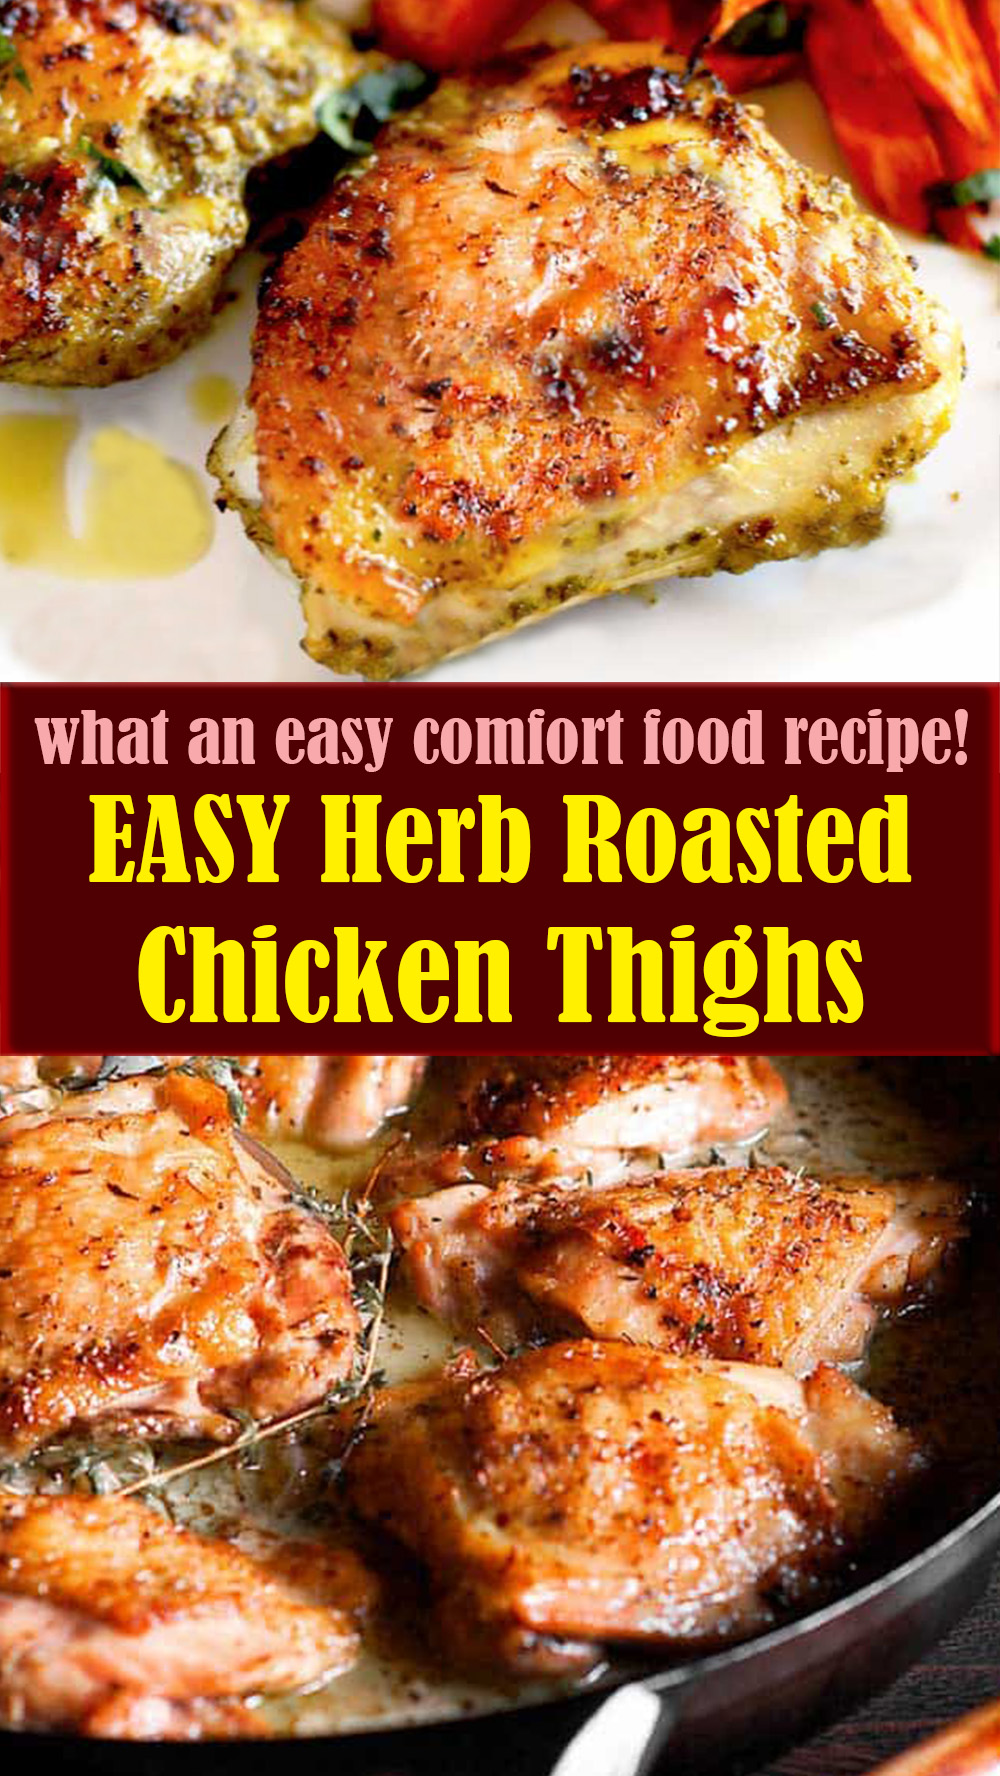 EASY Herb Roasted Chicken Thighs